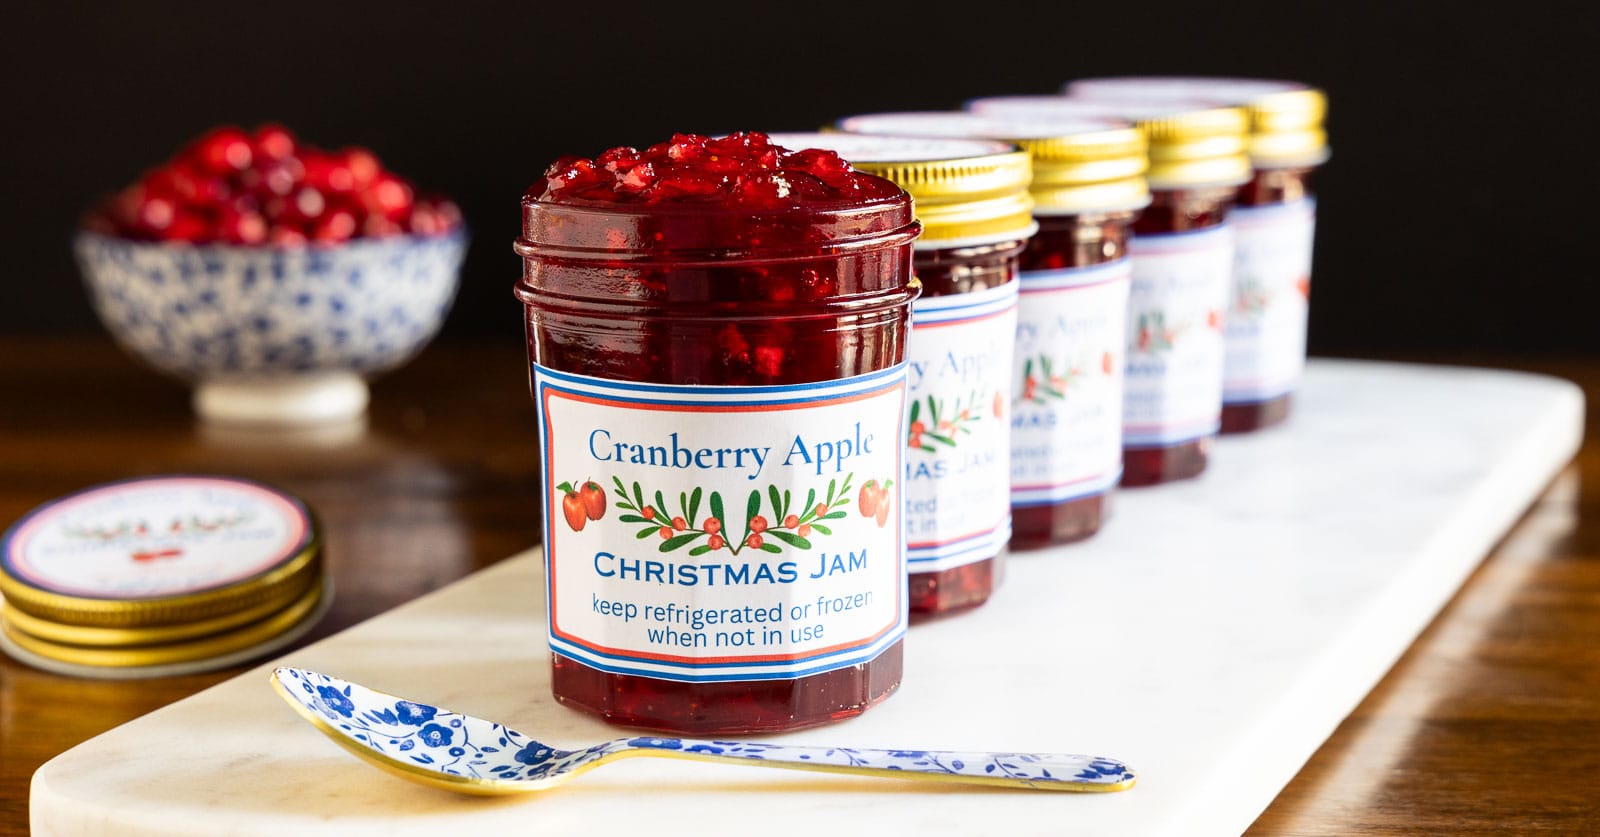 Horizontal closeup photo of a row of jars of Cranberry Apple Christmas Jam on a white marble slab.